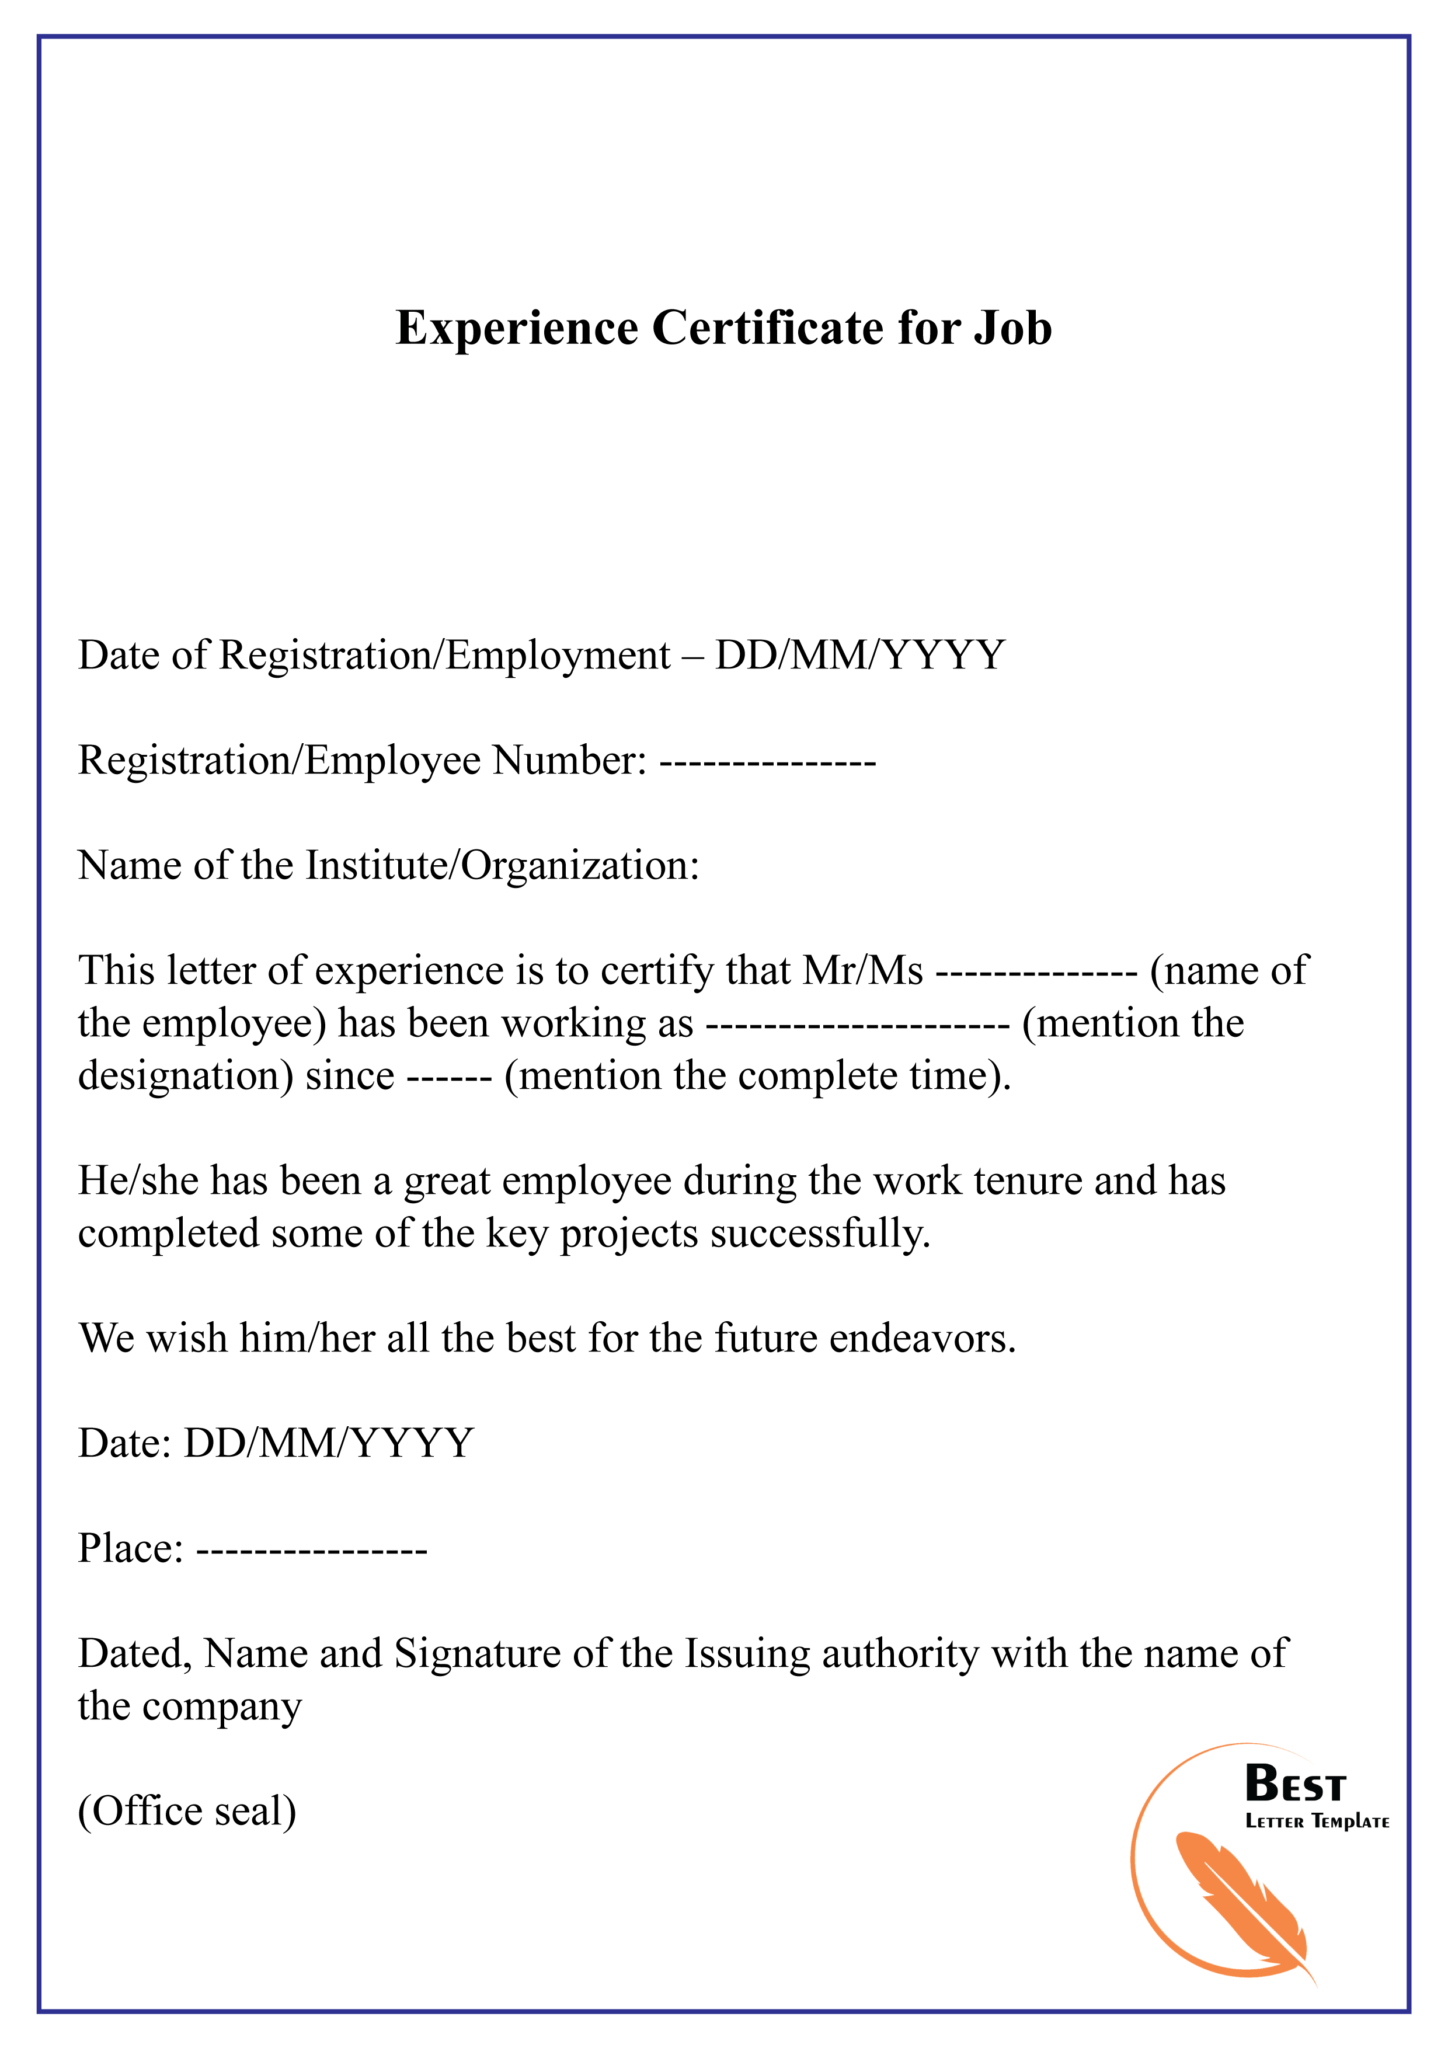 experience-certificate-for-job-01-best-letter-template-within